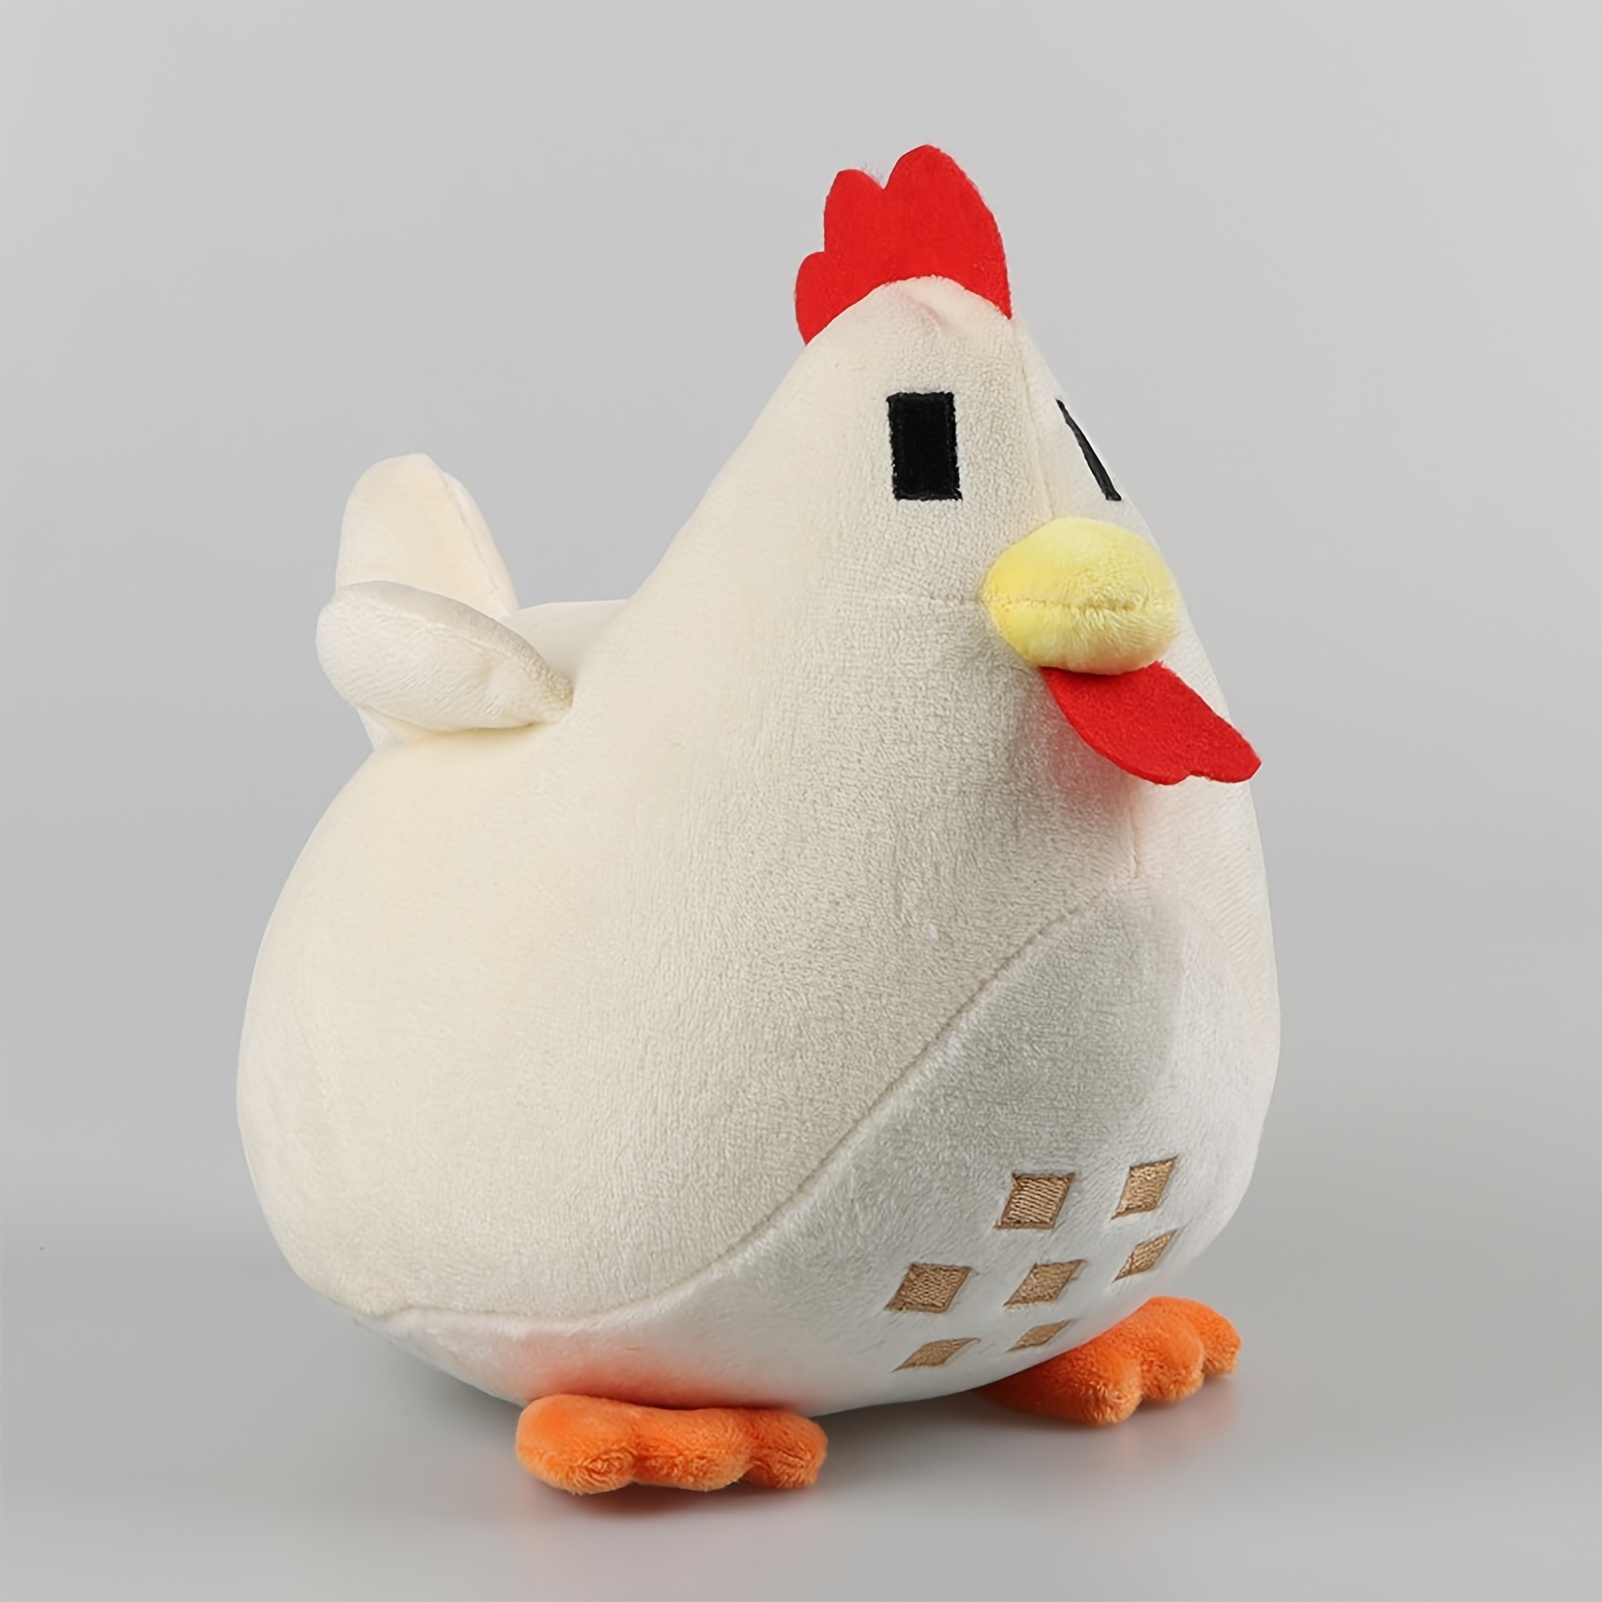 

20cm/7.87in Plush Valley Chicken Pillow - Soft Stuffed Animal Toy For Kids, Perfect Birthday Gift!